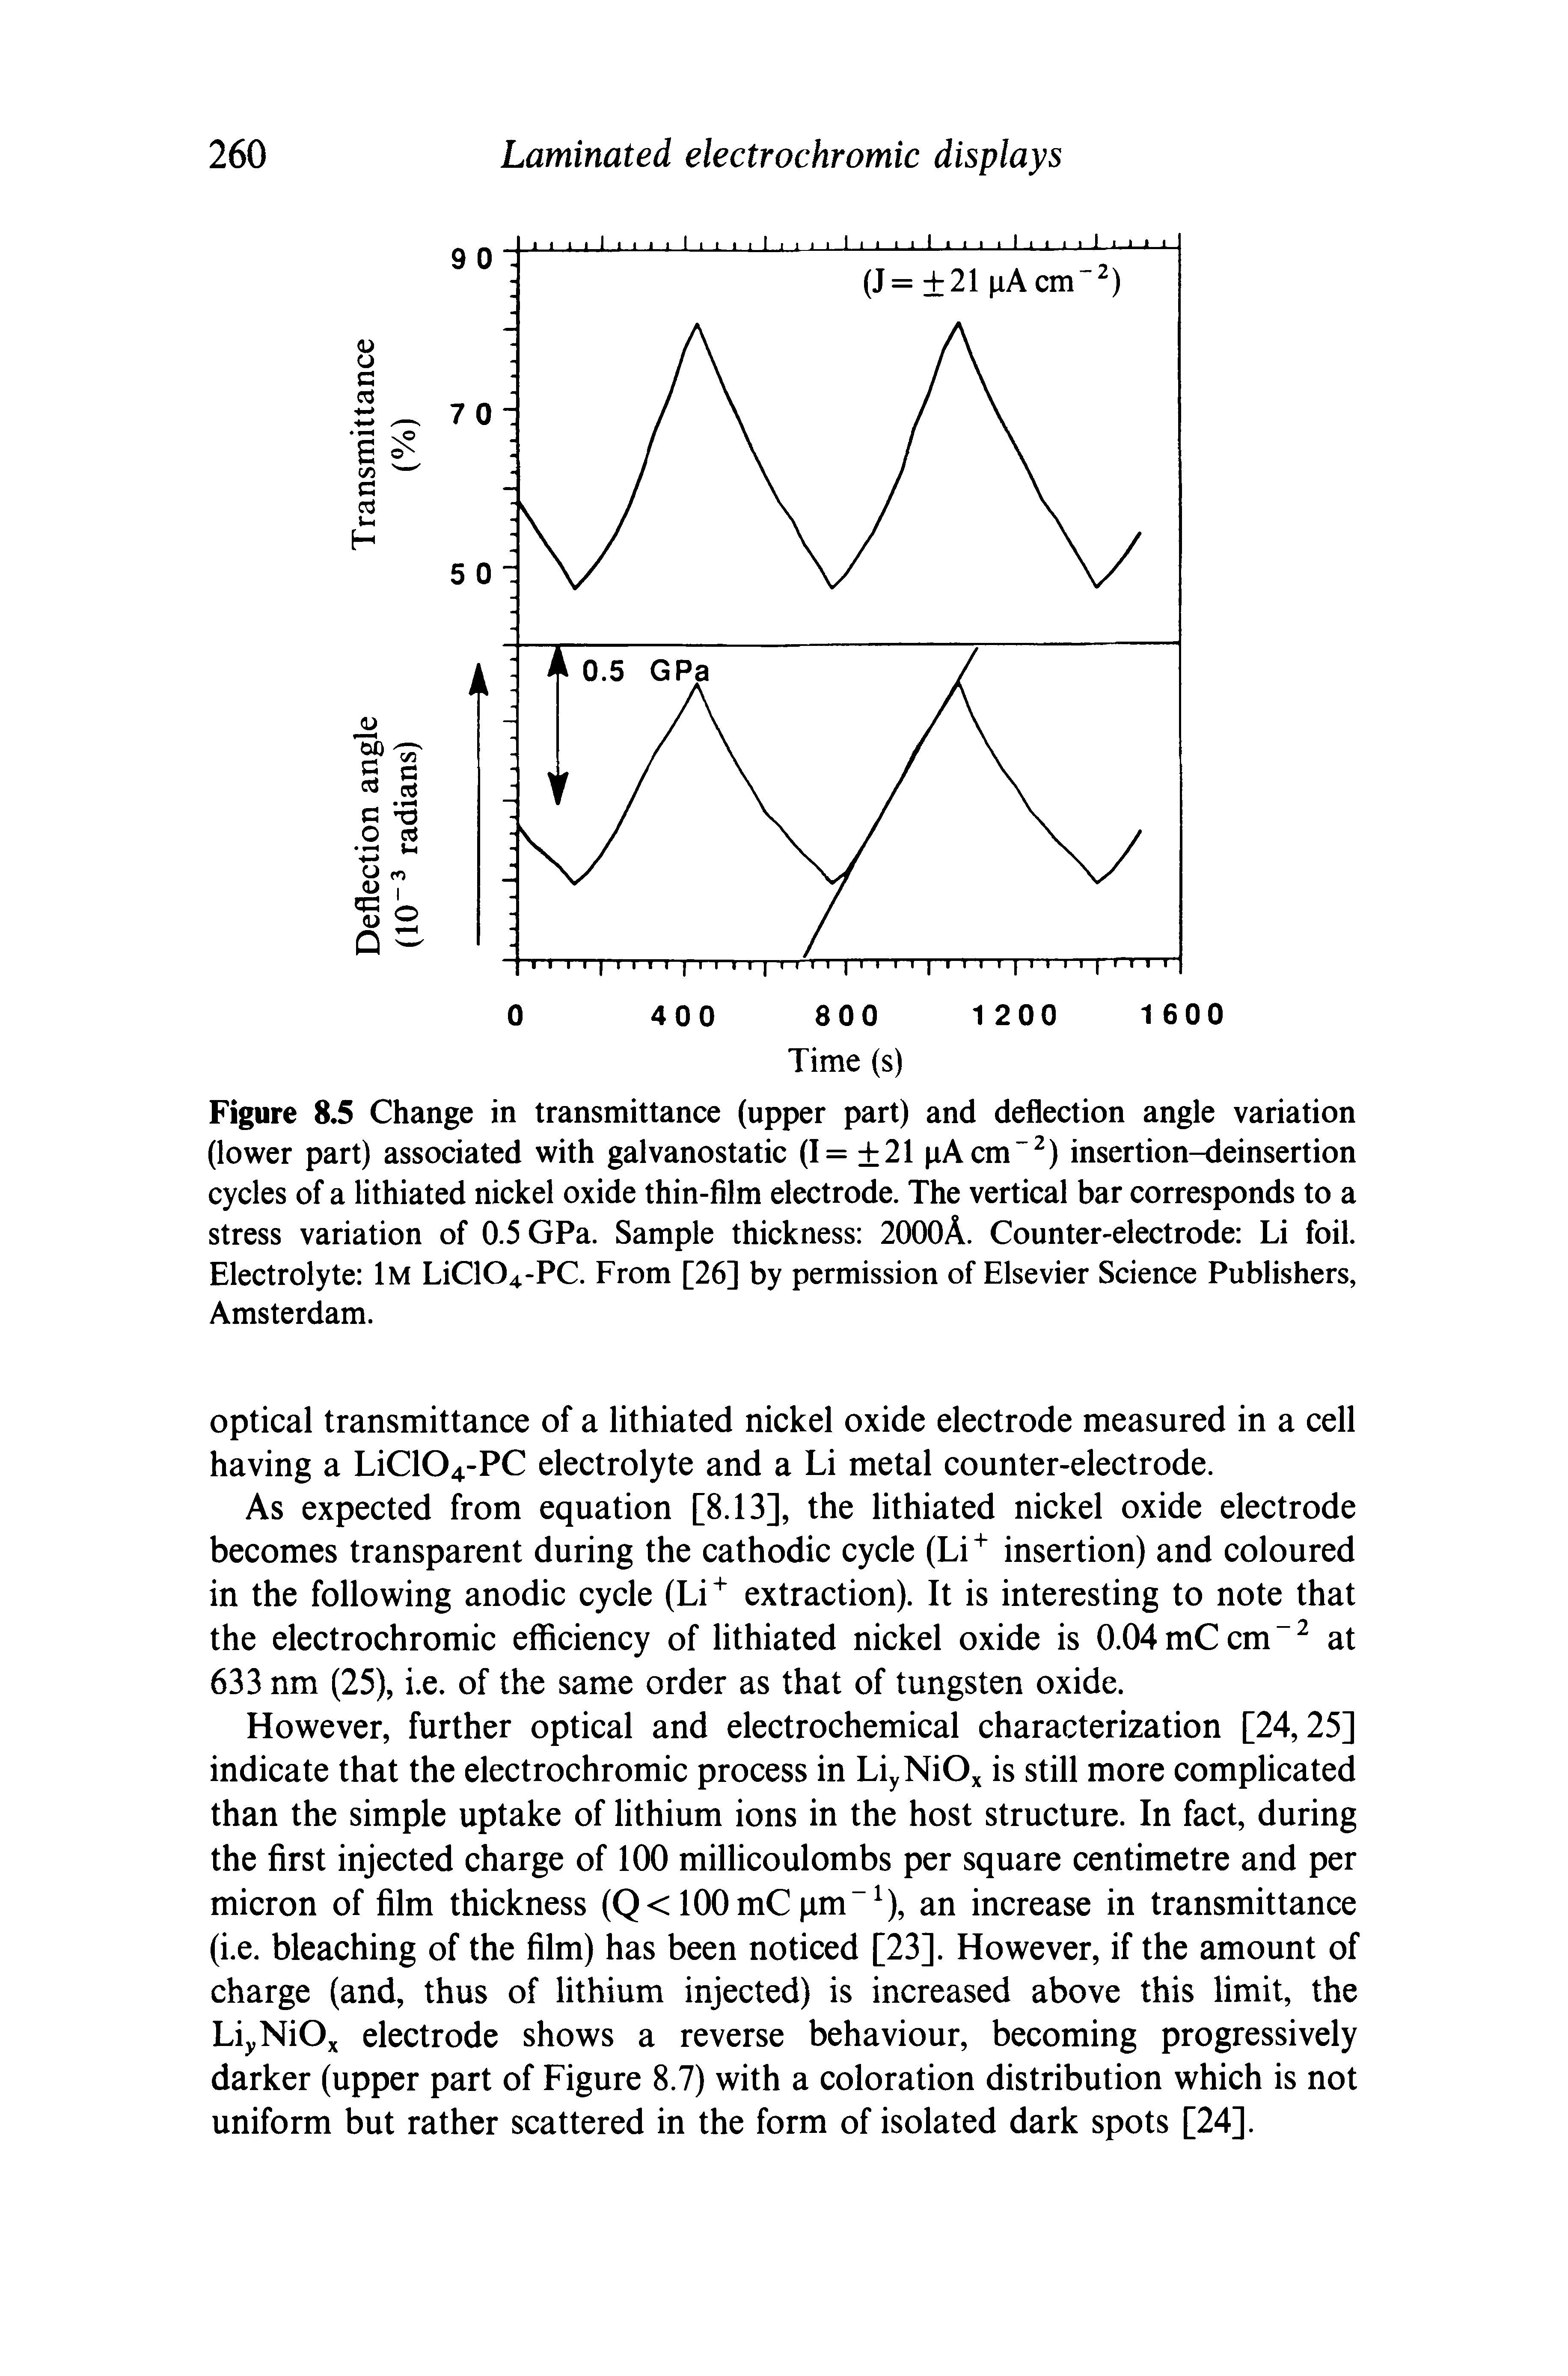 Figure 8.5 Change in transmittance (upper part) and deflection angle variation (lower part) associated with galvanostatic (1= 21 pAcm" ) insertion-deinsertion cycles of a lithiated nickel oxide thin-film electrode. The vertical bar corresponds to a stress variation of 0.5 GPa. Sample thickness 2000A. Counter-electrode Li foil. Electrolyte iM LiC104-PC. From [26] by permission of Elsevier Science Publishers, Amsterdam.